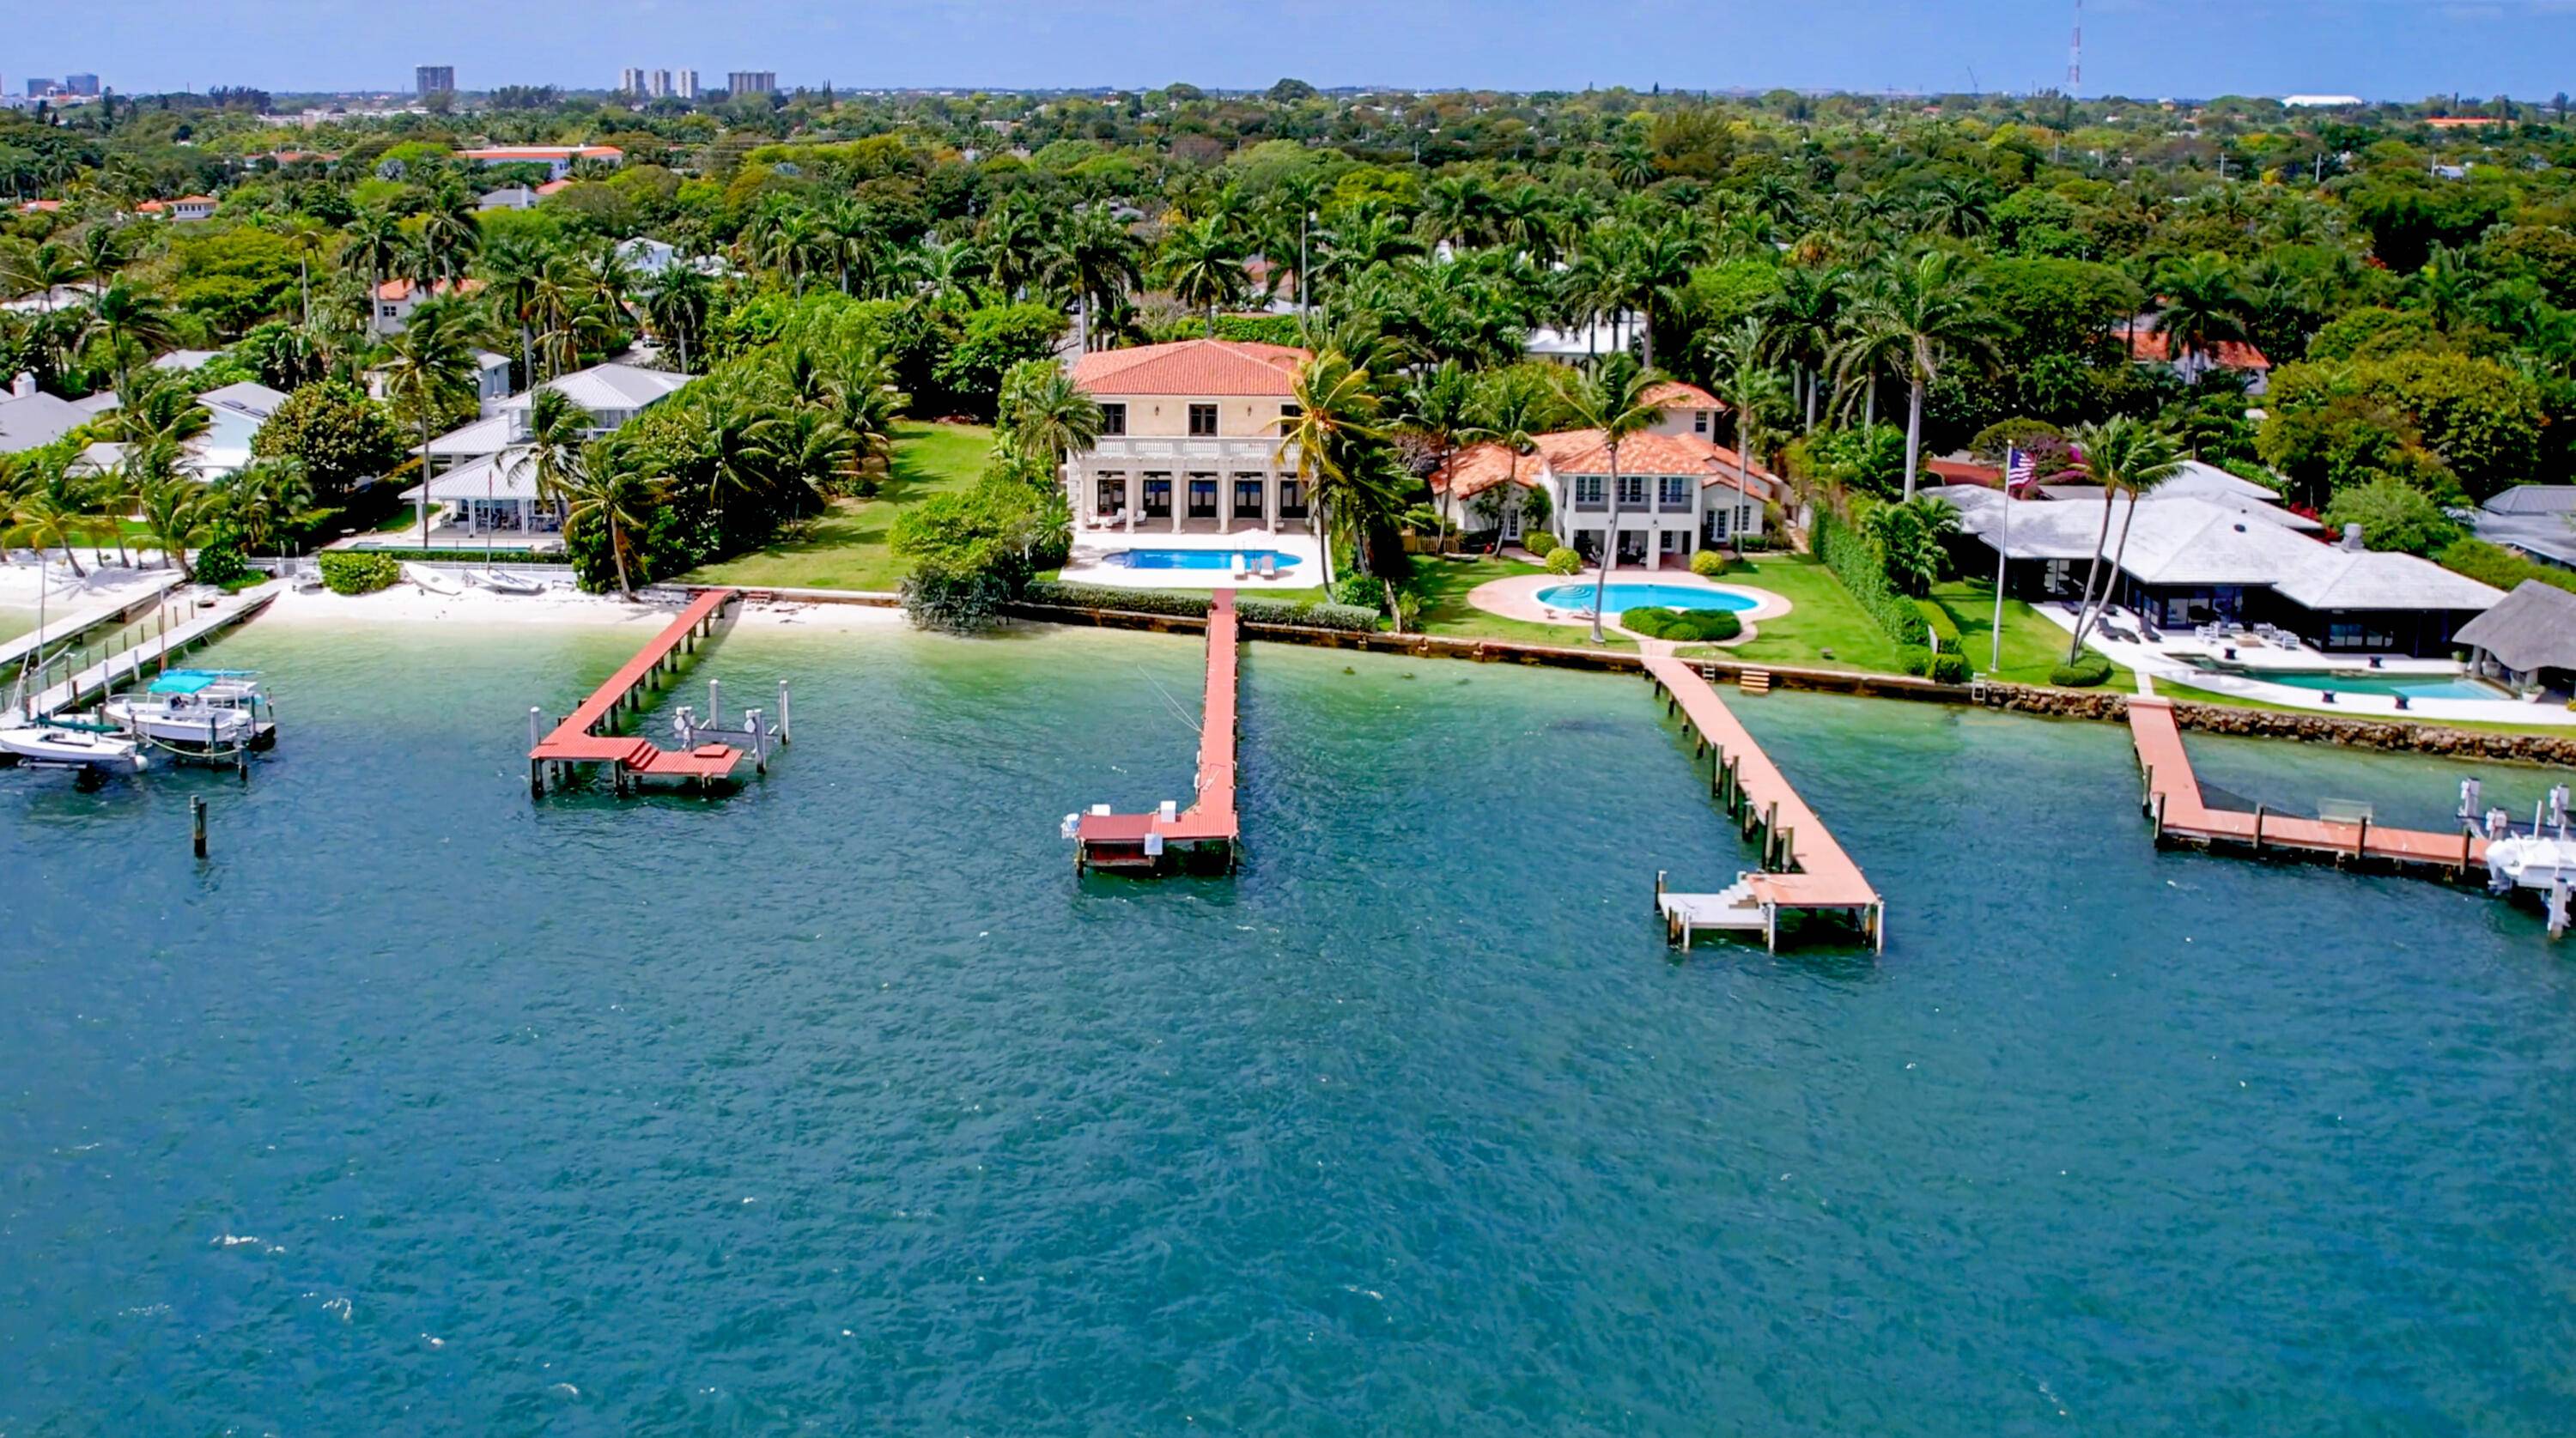 Enjoy wide open intracoastal views overlooking Palm Beach estate homes at this rare direct waterfront 6BR 6.